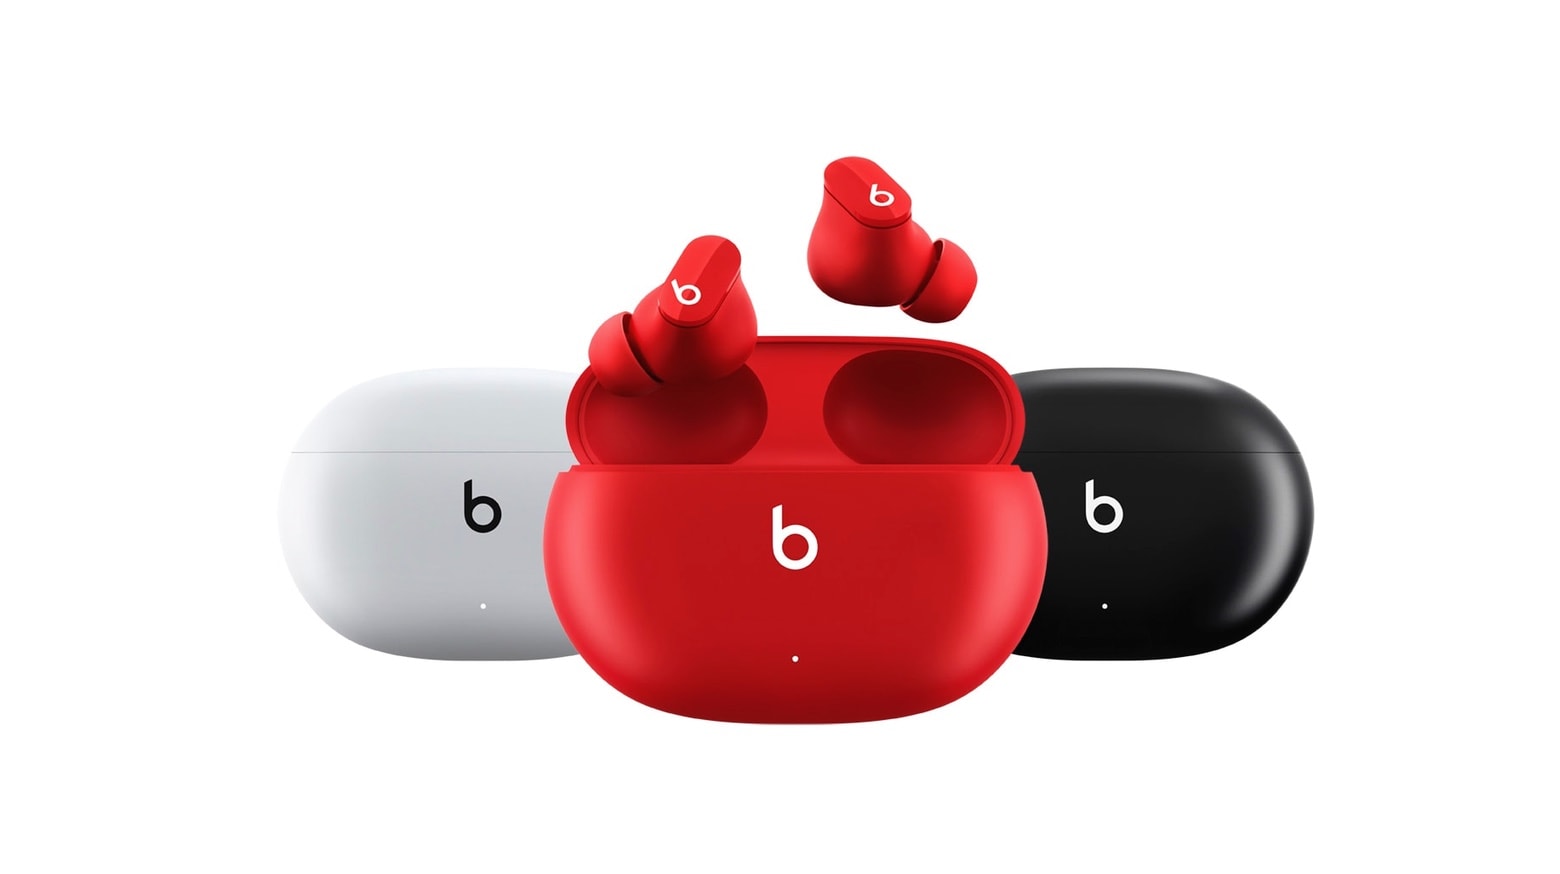 Beats Studio Buds come in white, red and black.